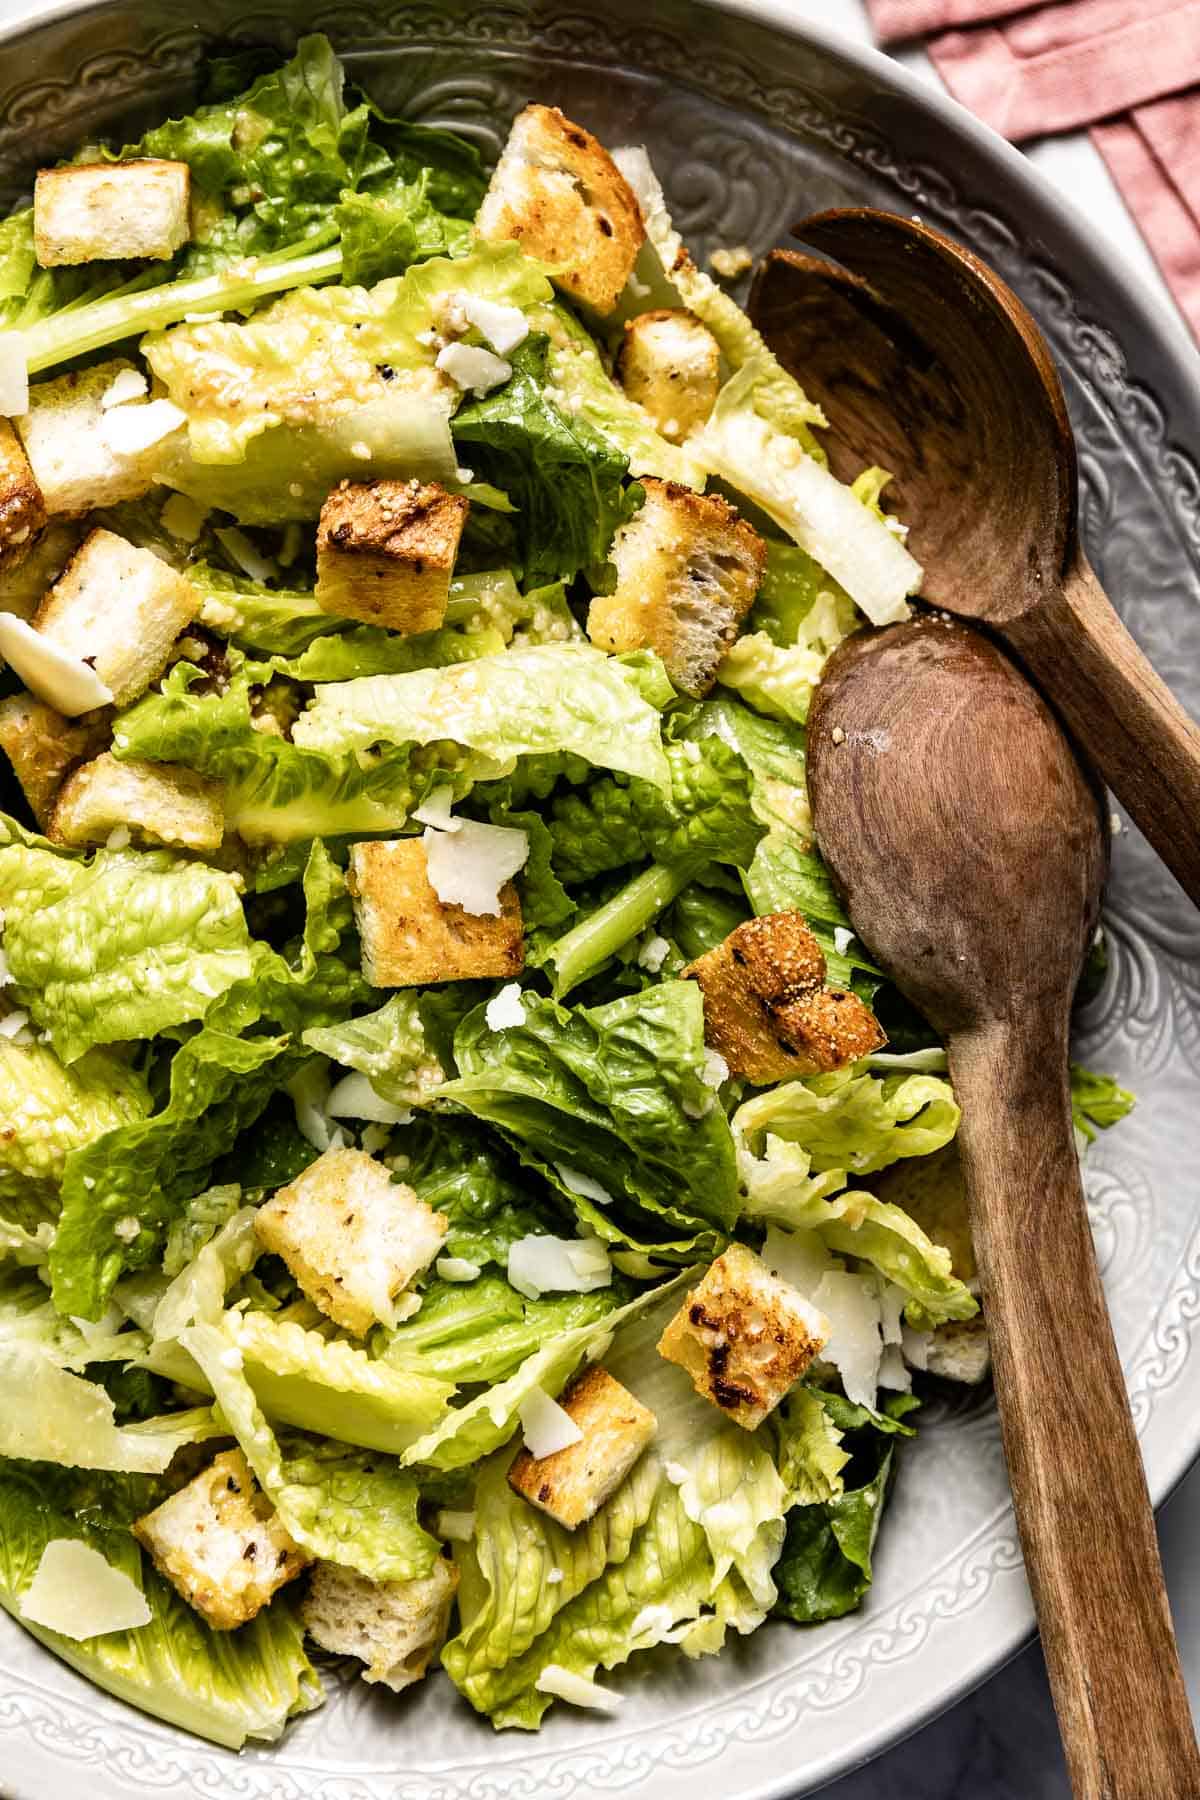 Traditional Caesar Salad in a bowl with wooden spoons on the side from the top view